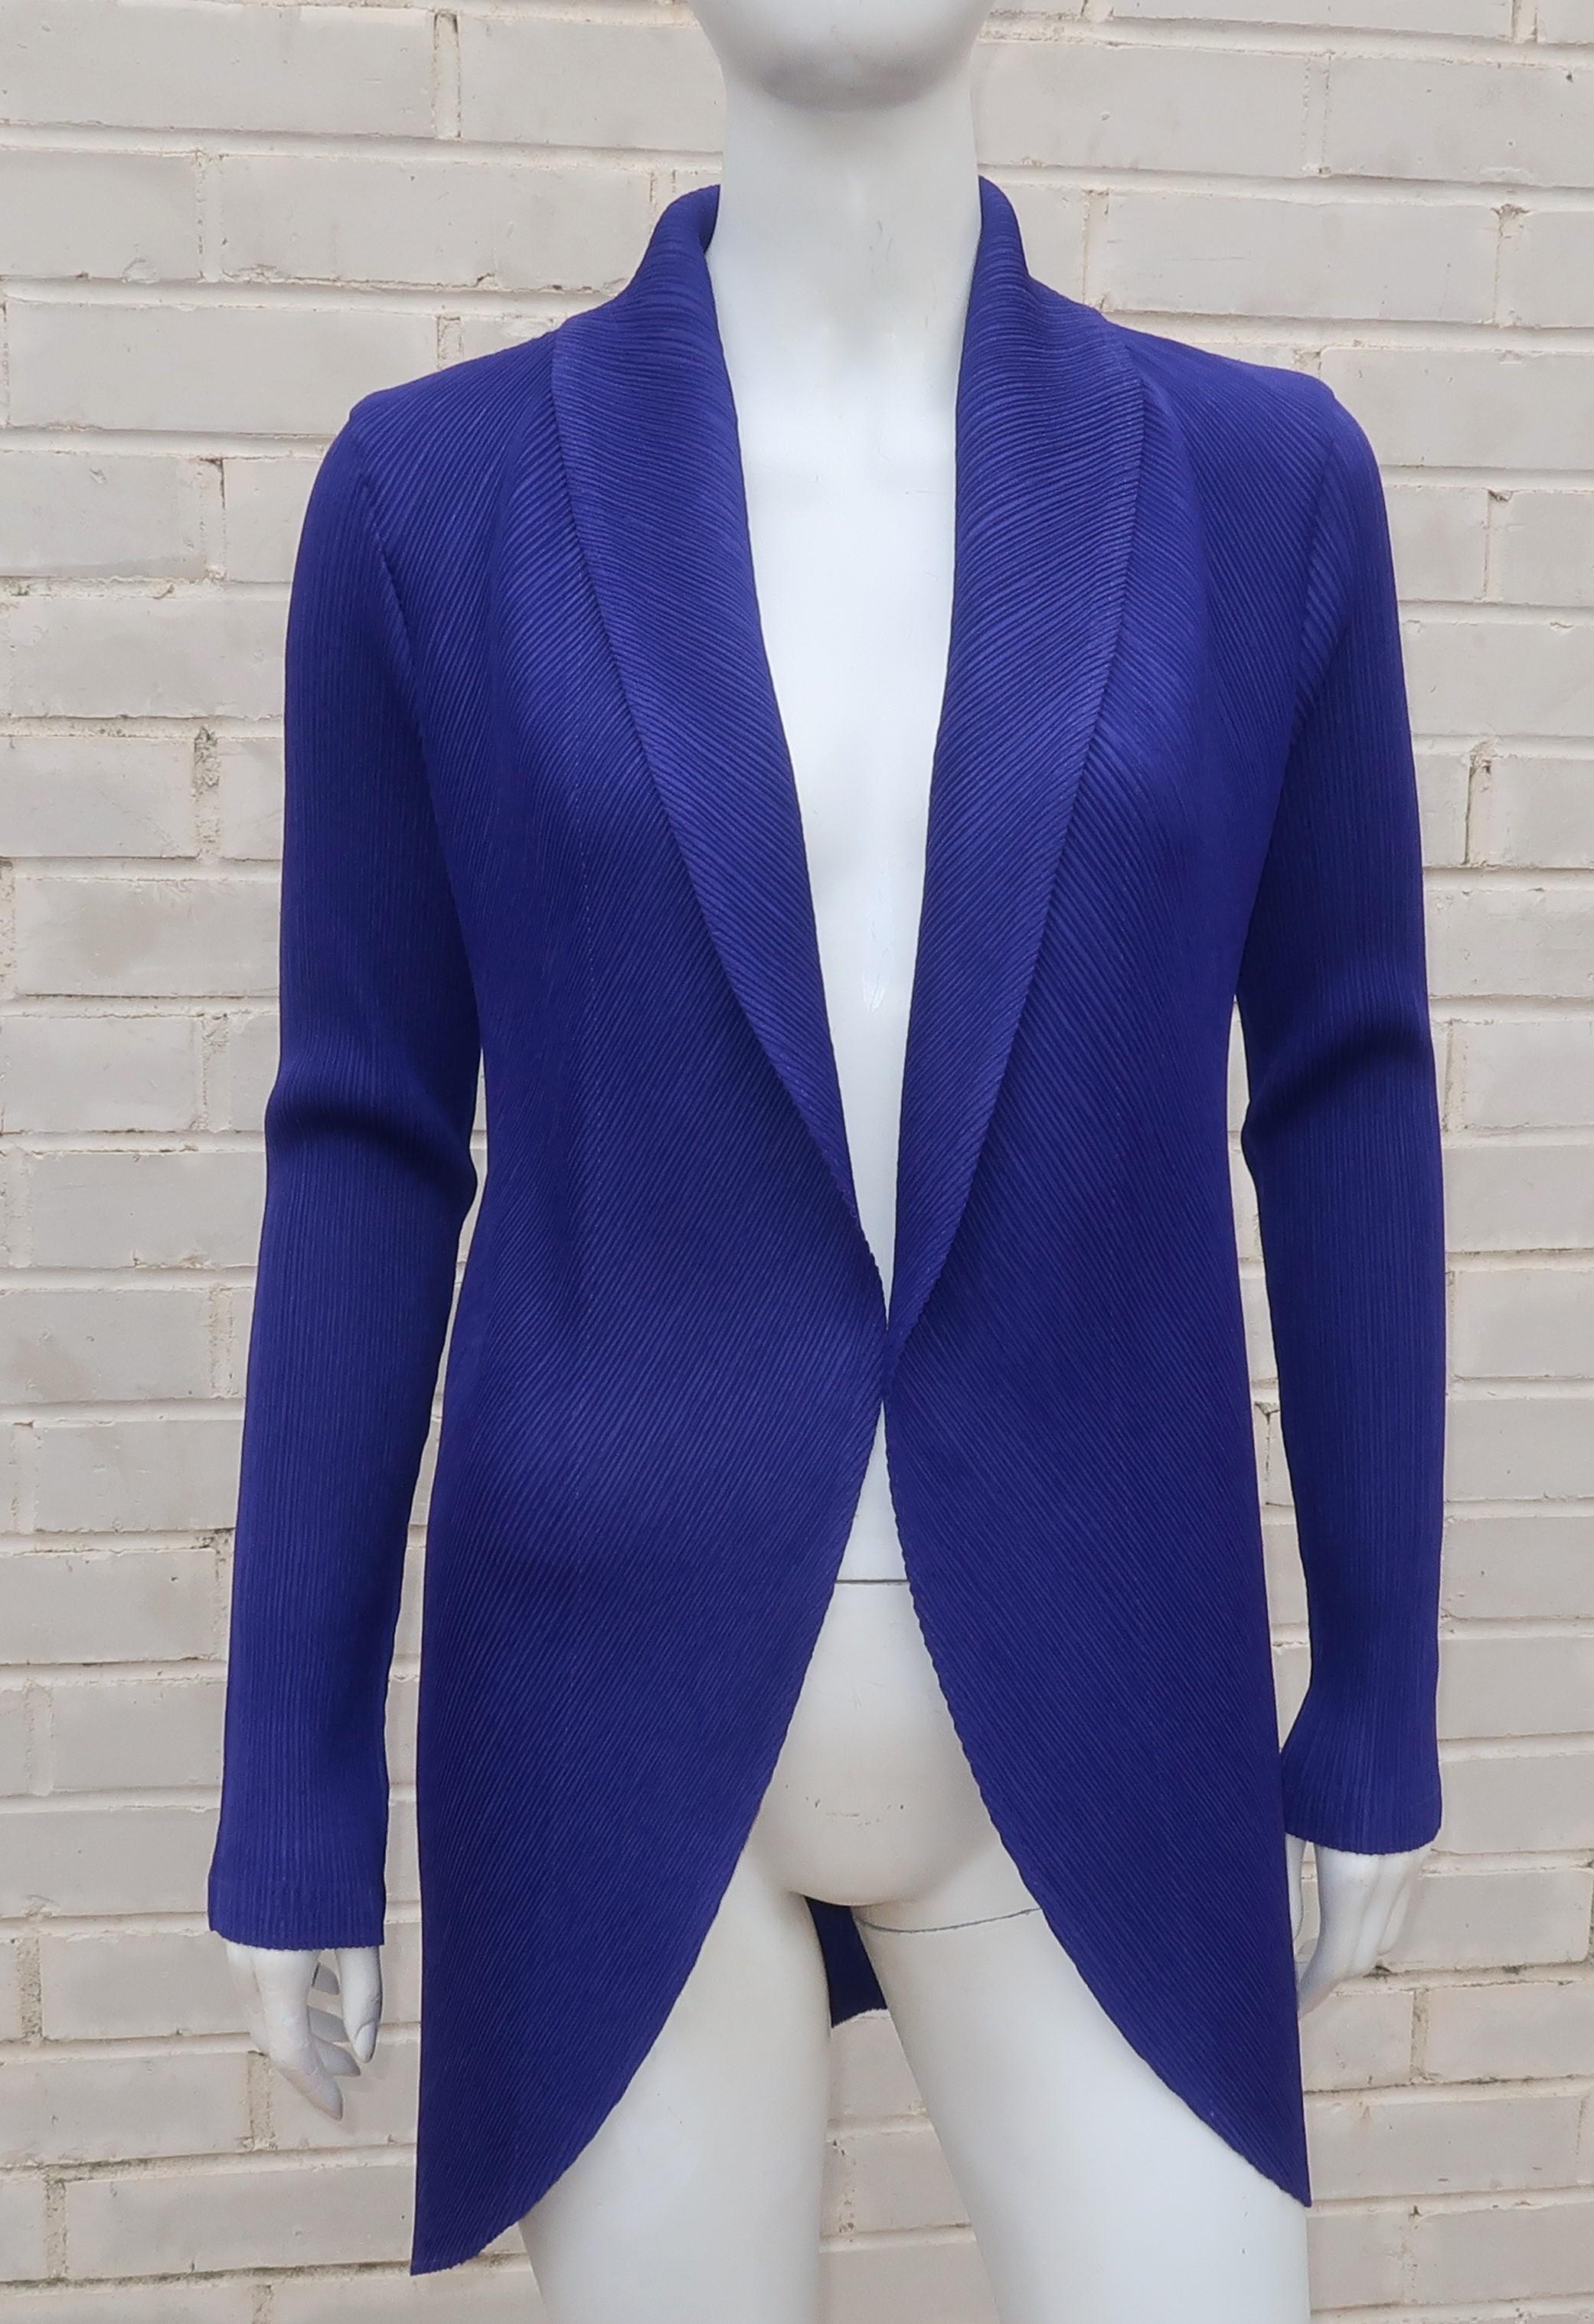 Issey Miyake White Label micro pleated royal purple jacket with an open construction, shawl collar and a cutaway style silhouette. A wonderful topper that will add a finished look to Miyake separates.  Very good condition.
SIZING & MEASUREMENTS
The